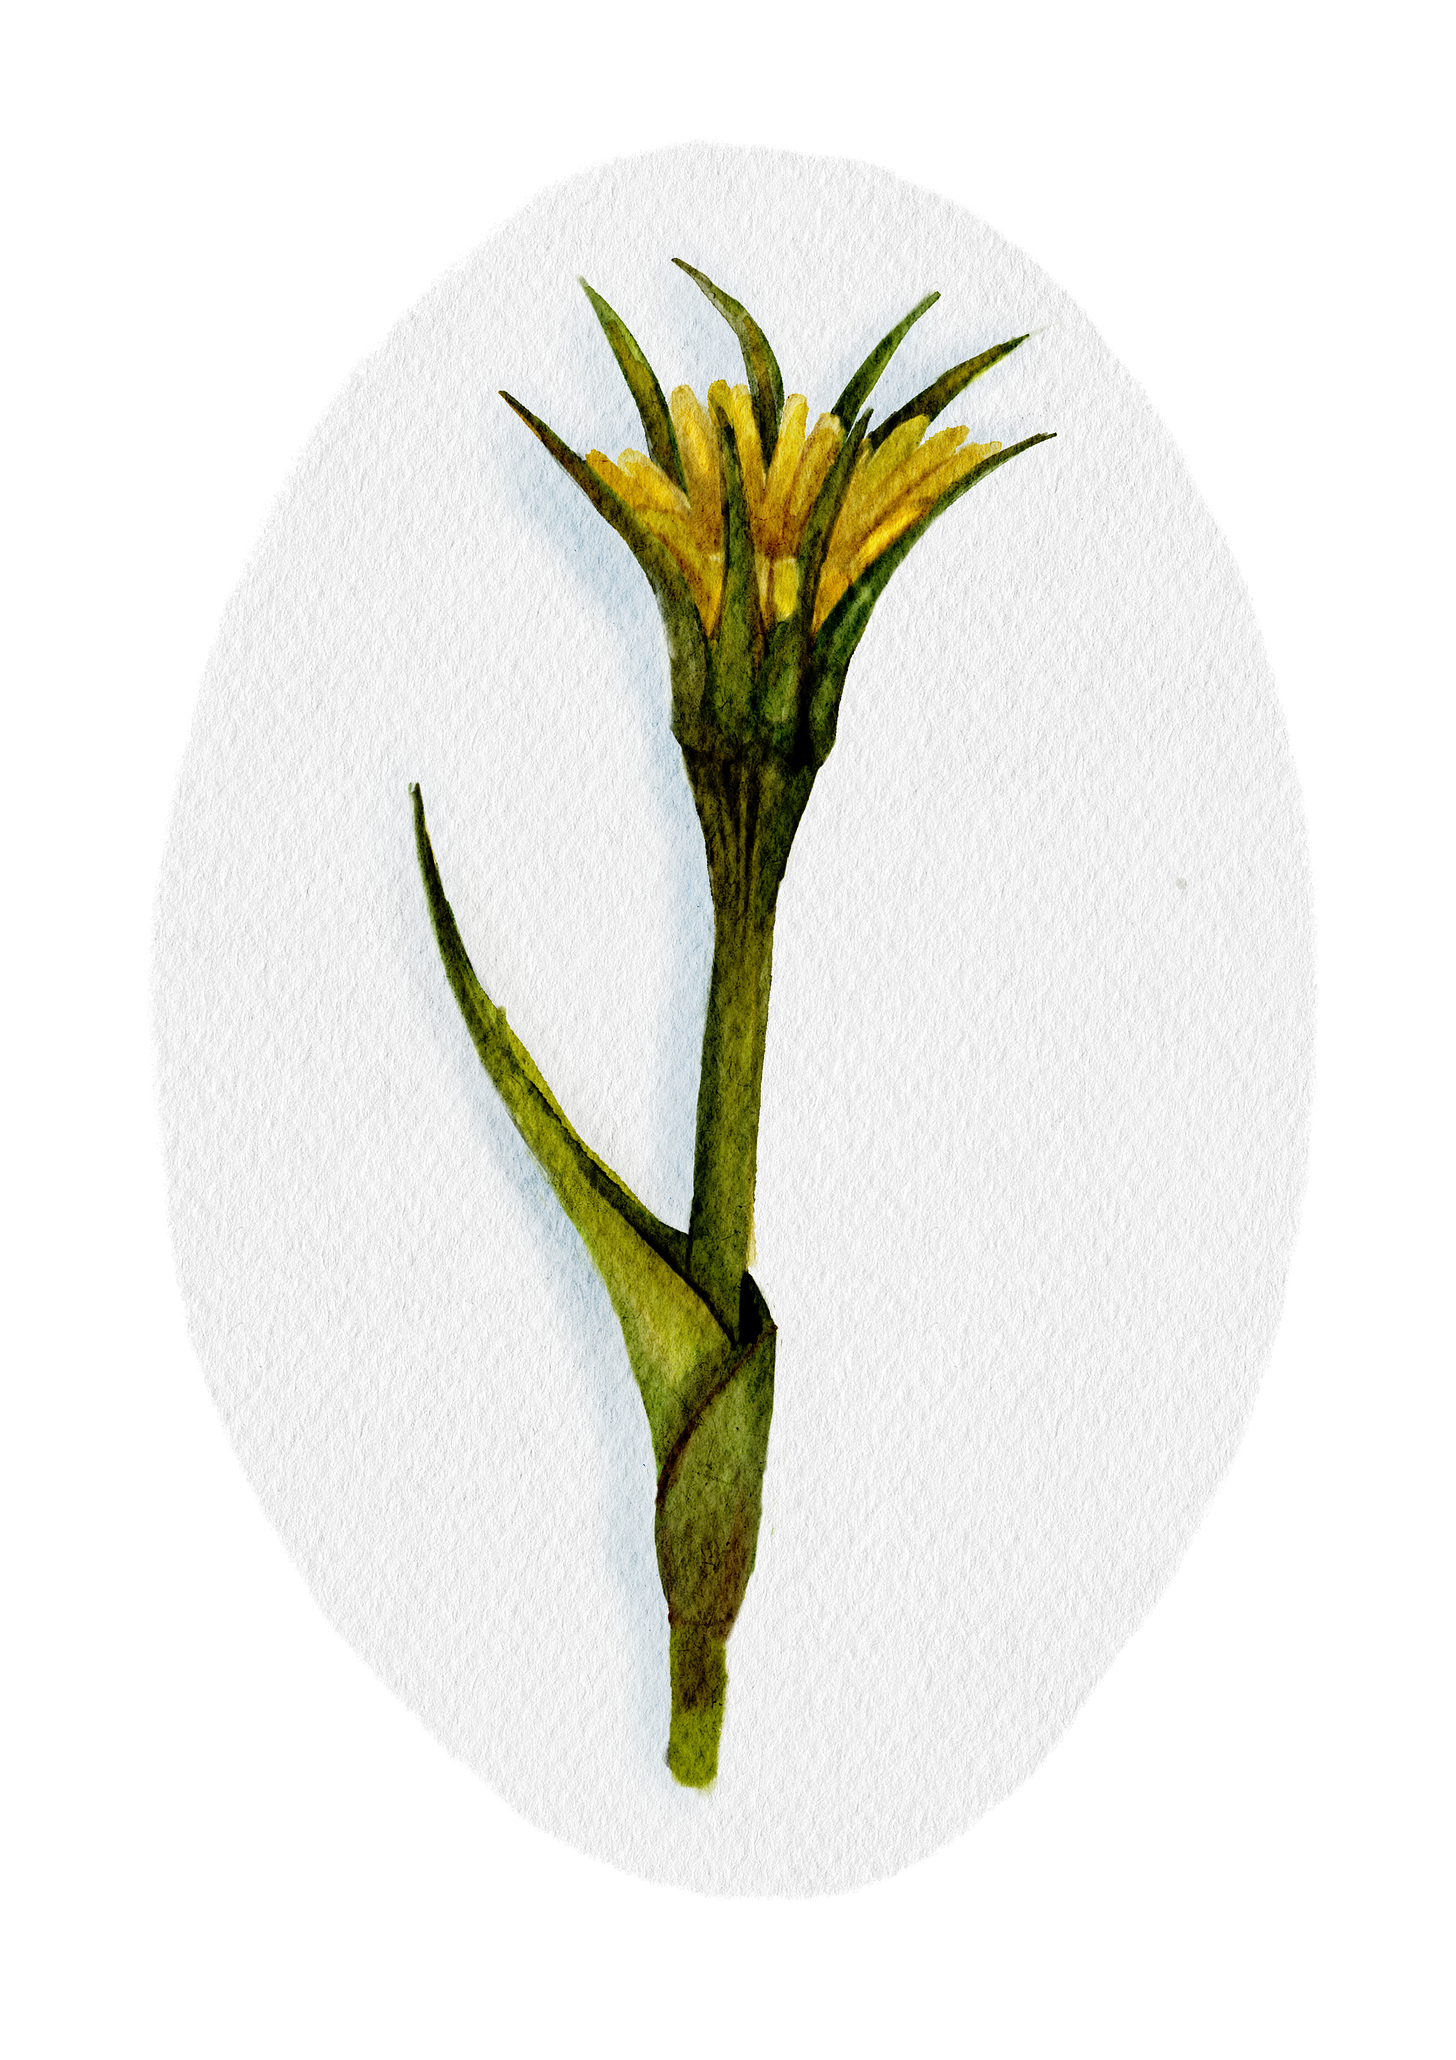 Watercolour painting of a meadow goat's-beard flower. Yellow bloom, like a small dandelion.